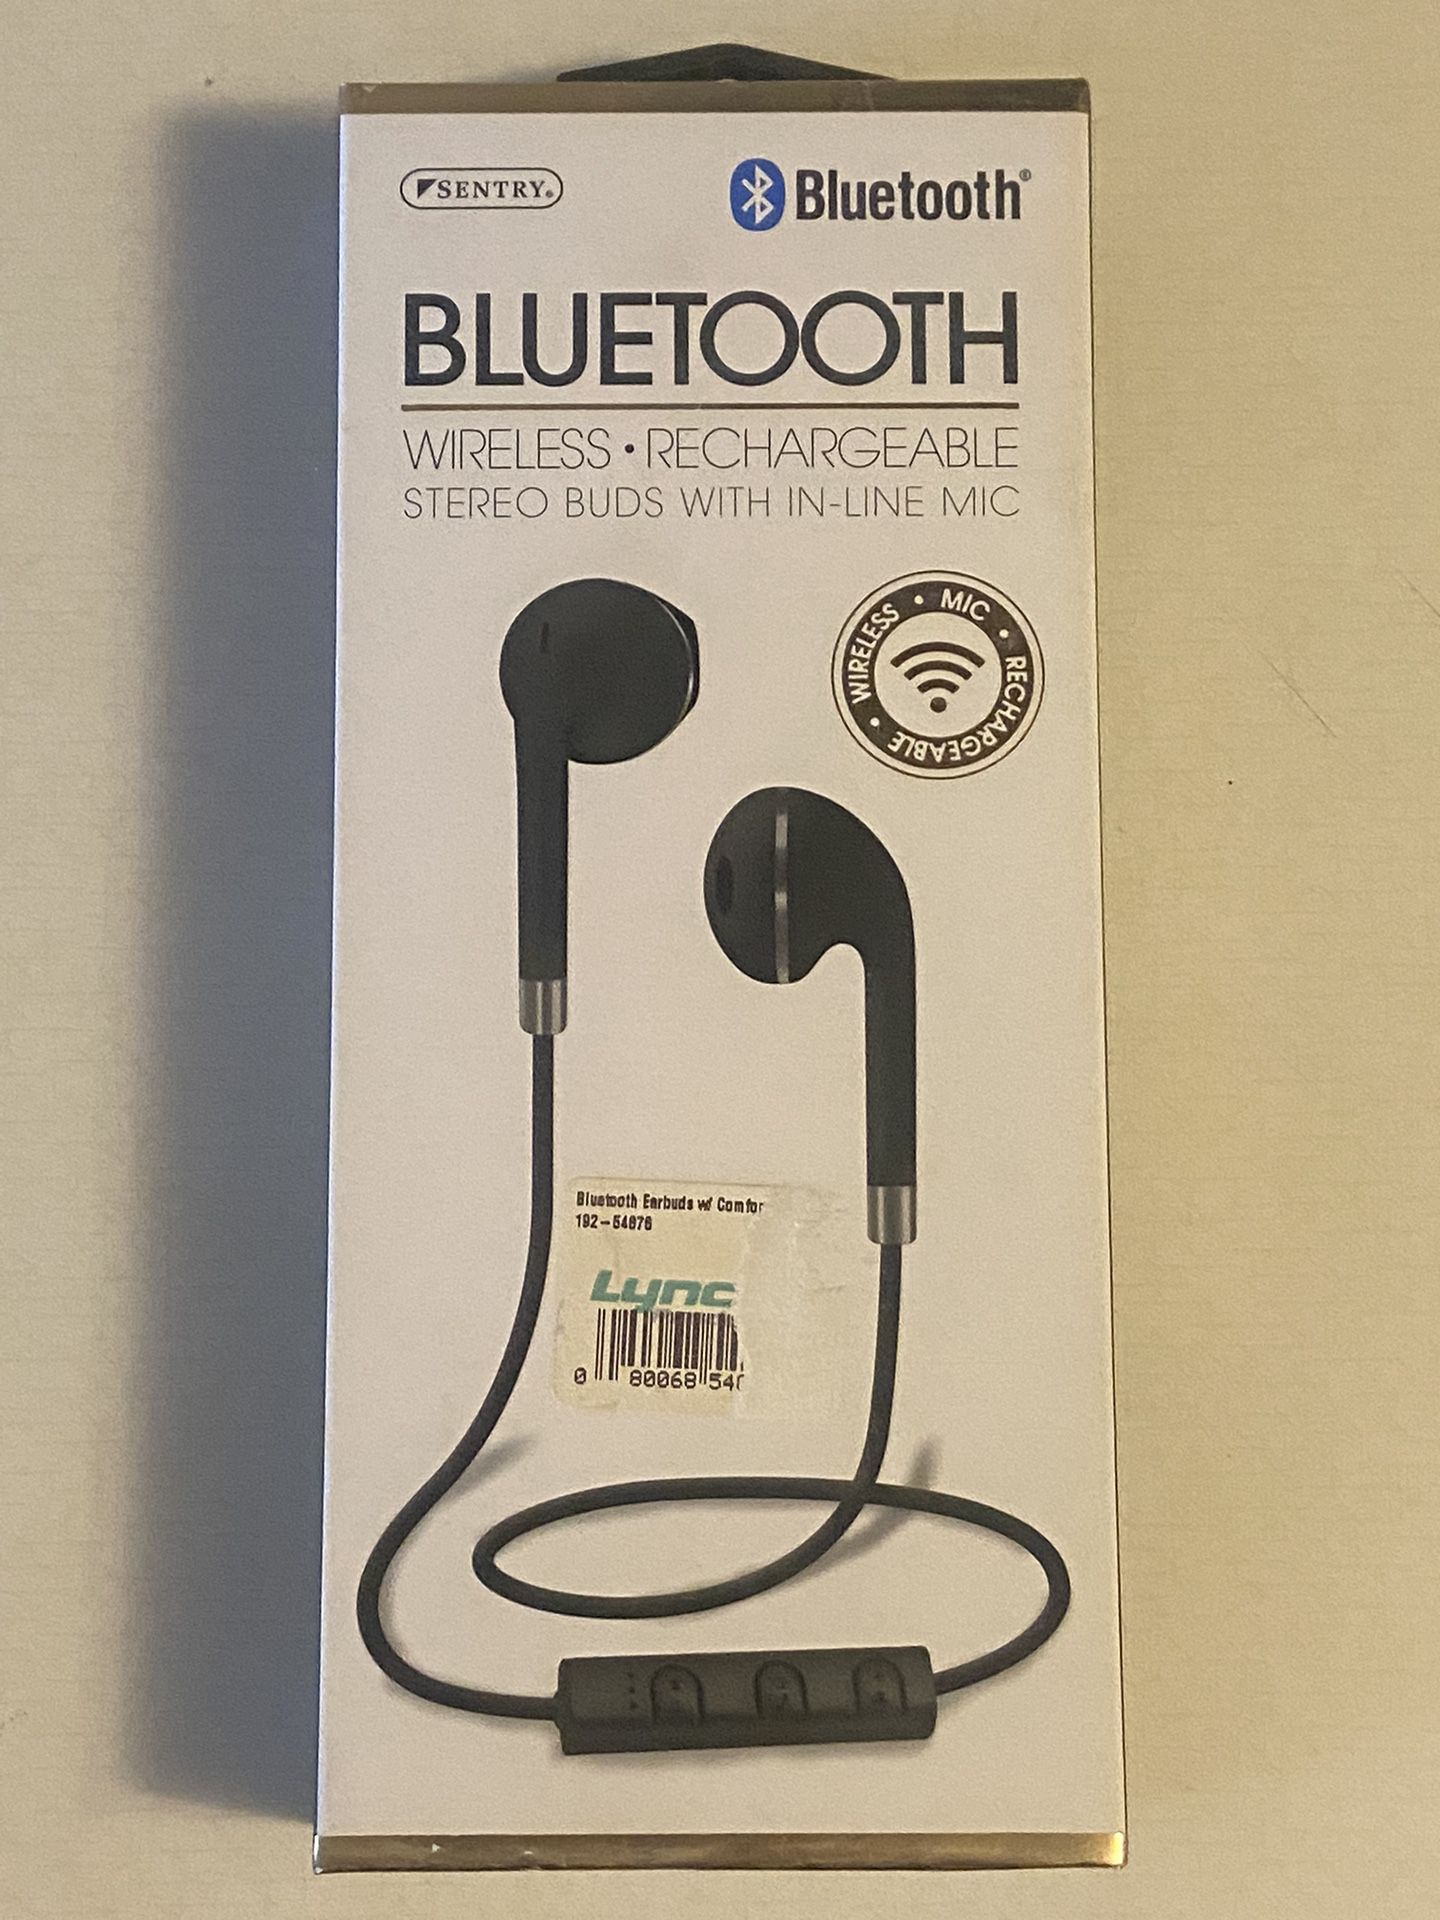 Bluetooth Wireless • Rechargeable Earbuds